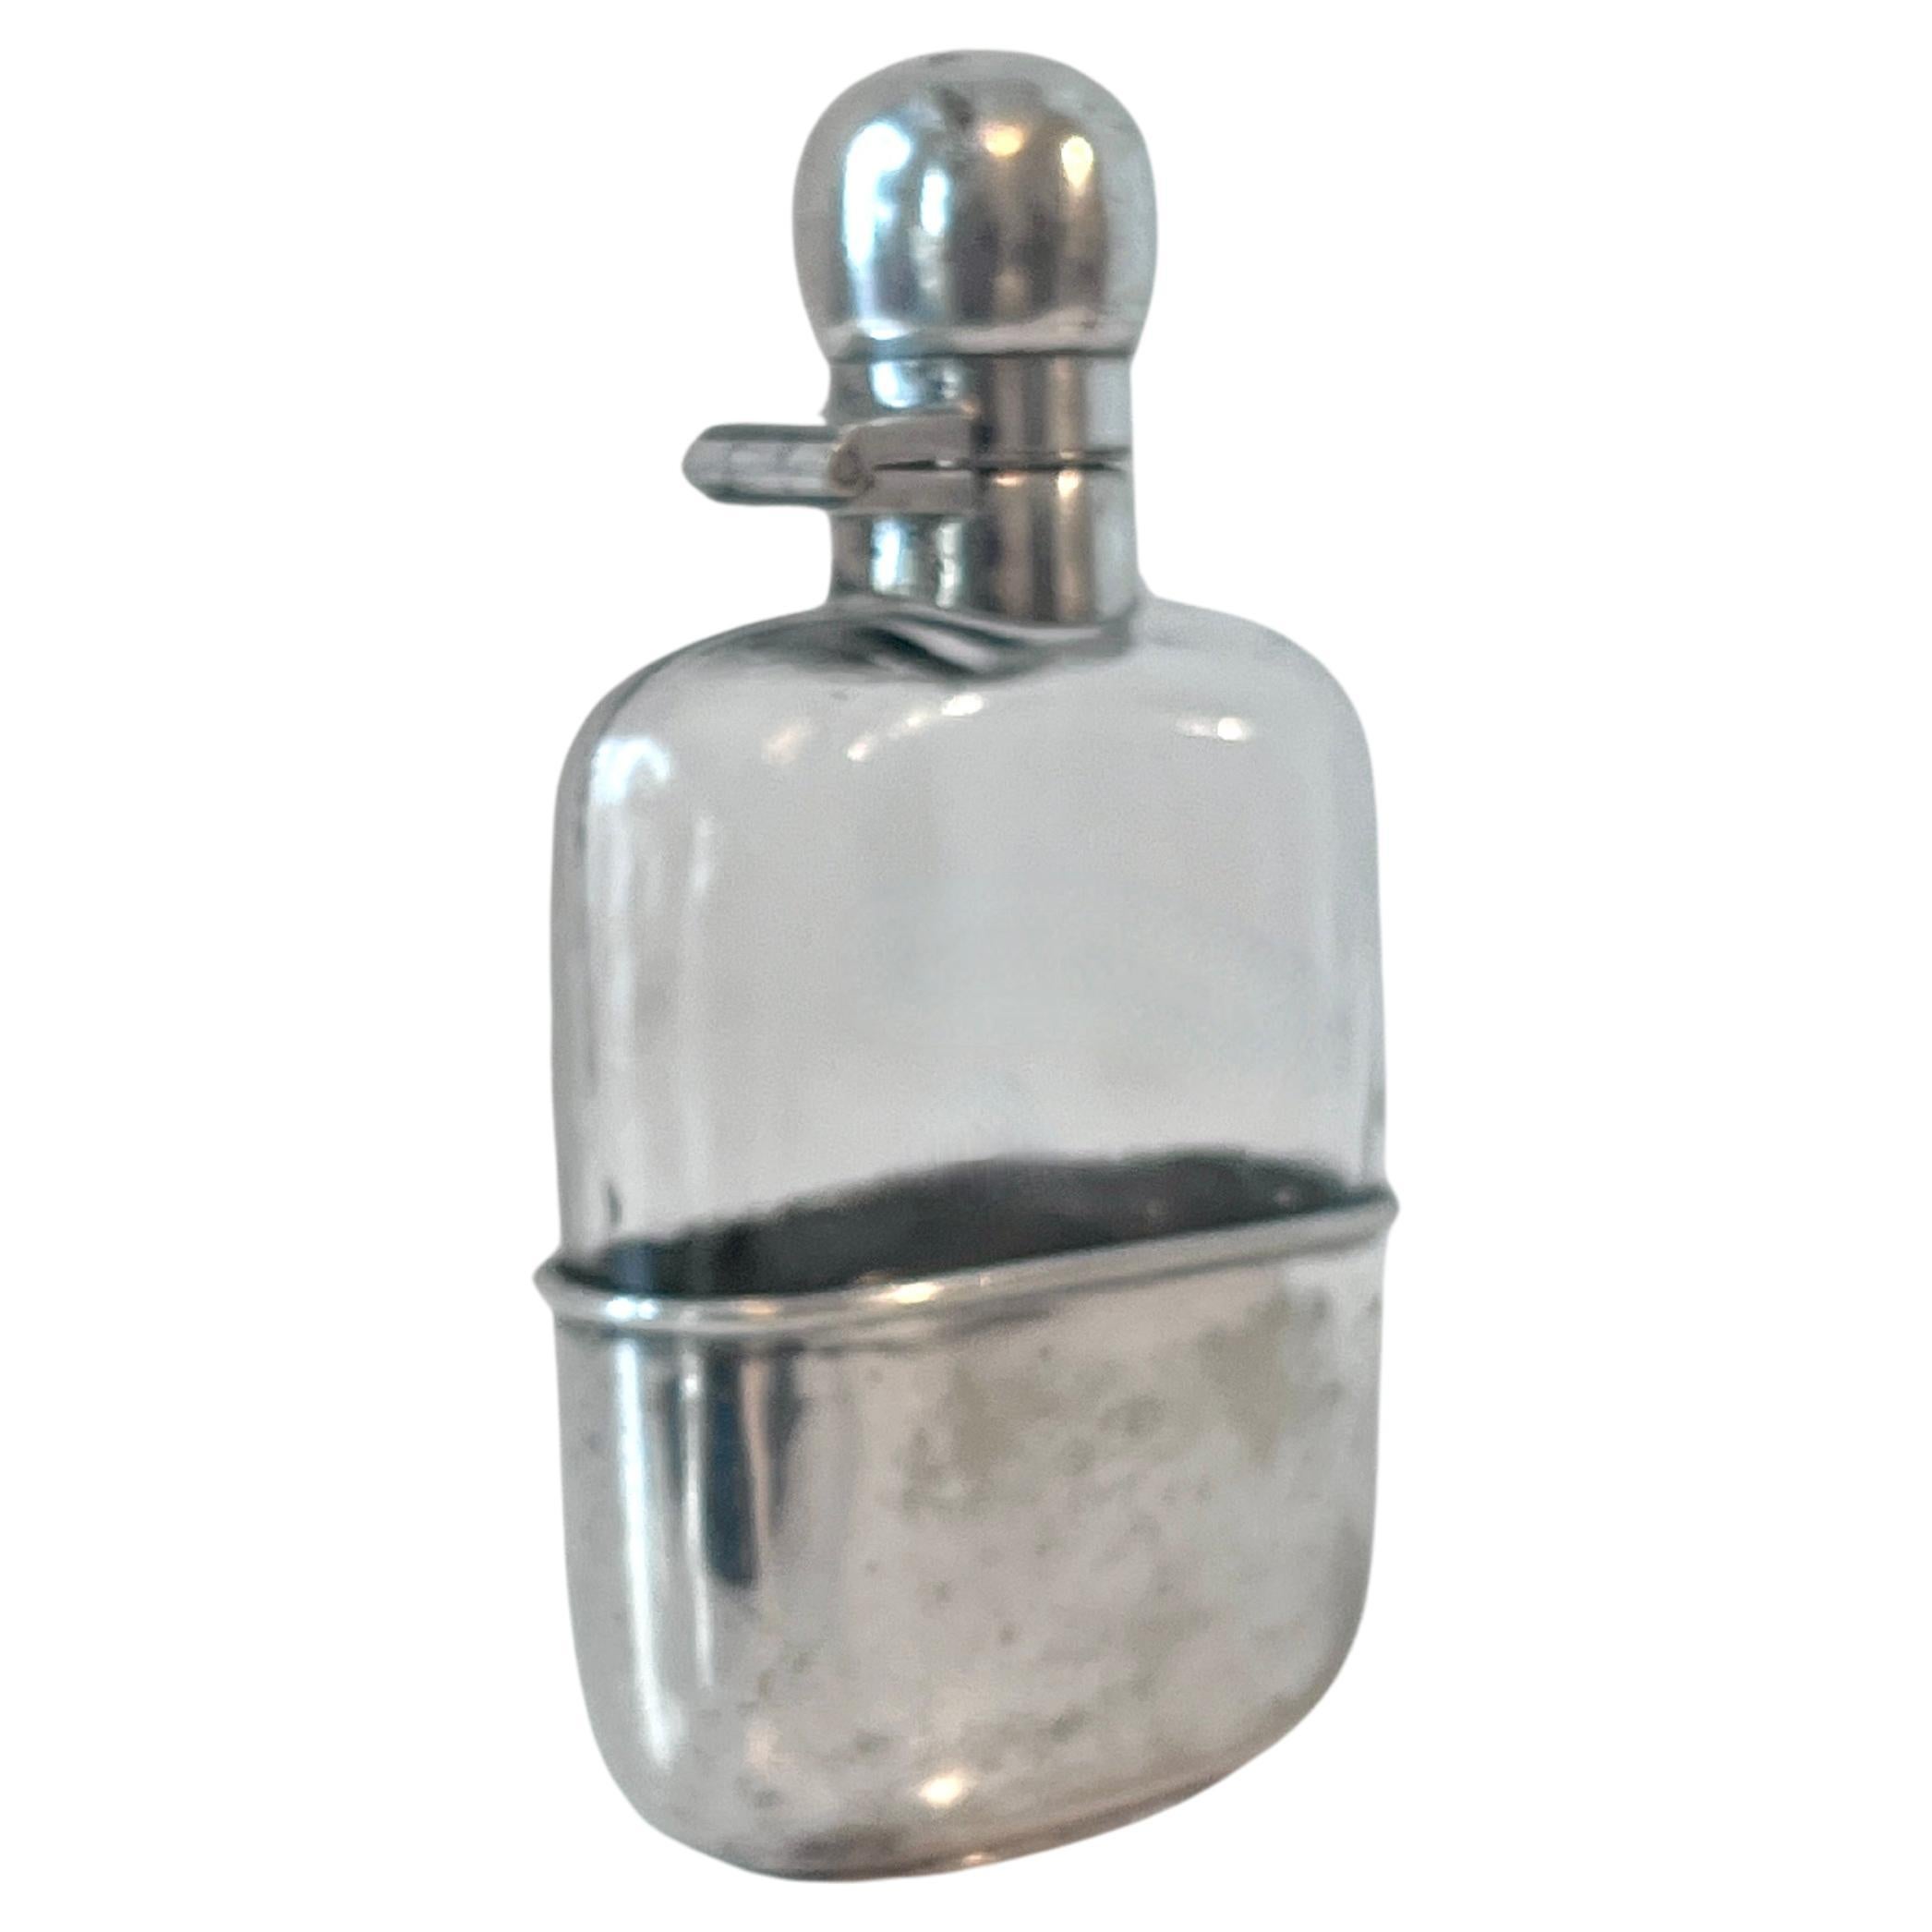 A wonderful Silver Plate Flask.  The top is a screw type closure and does not leak.

The Bottom slides off to be used as a cup.  A small flask that is a perfect fit for a side pocket, pant pocket or jacket and also works in a hand bag.

Take your